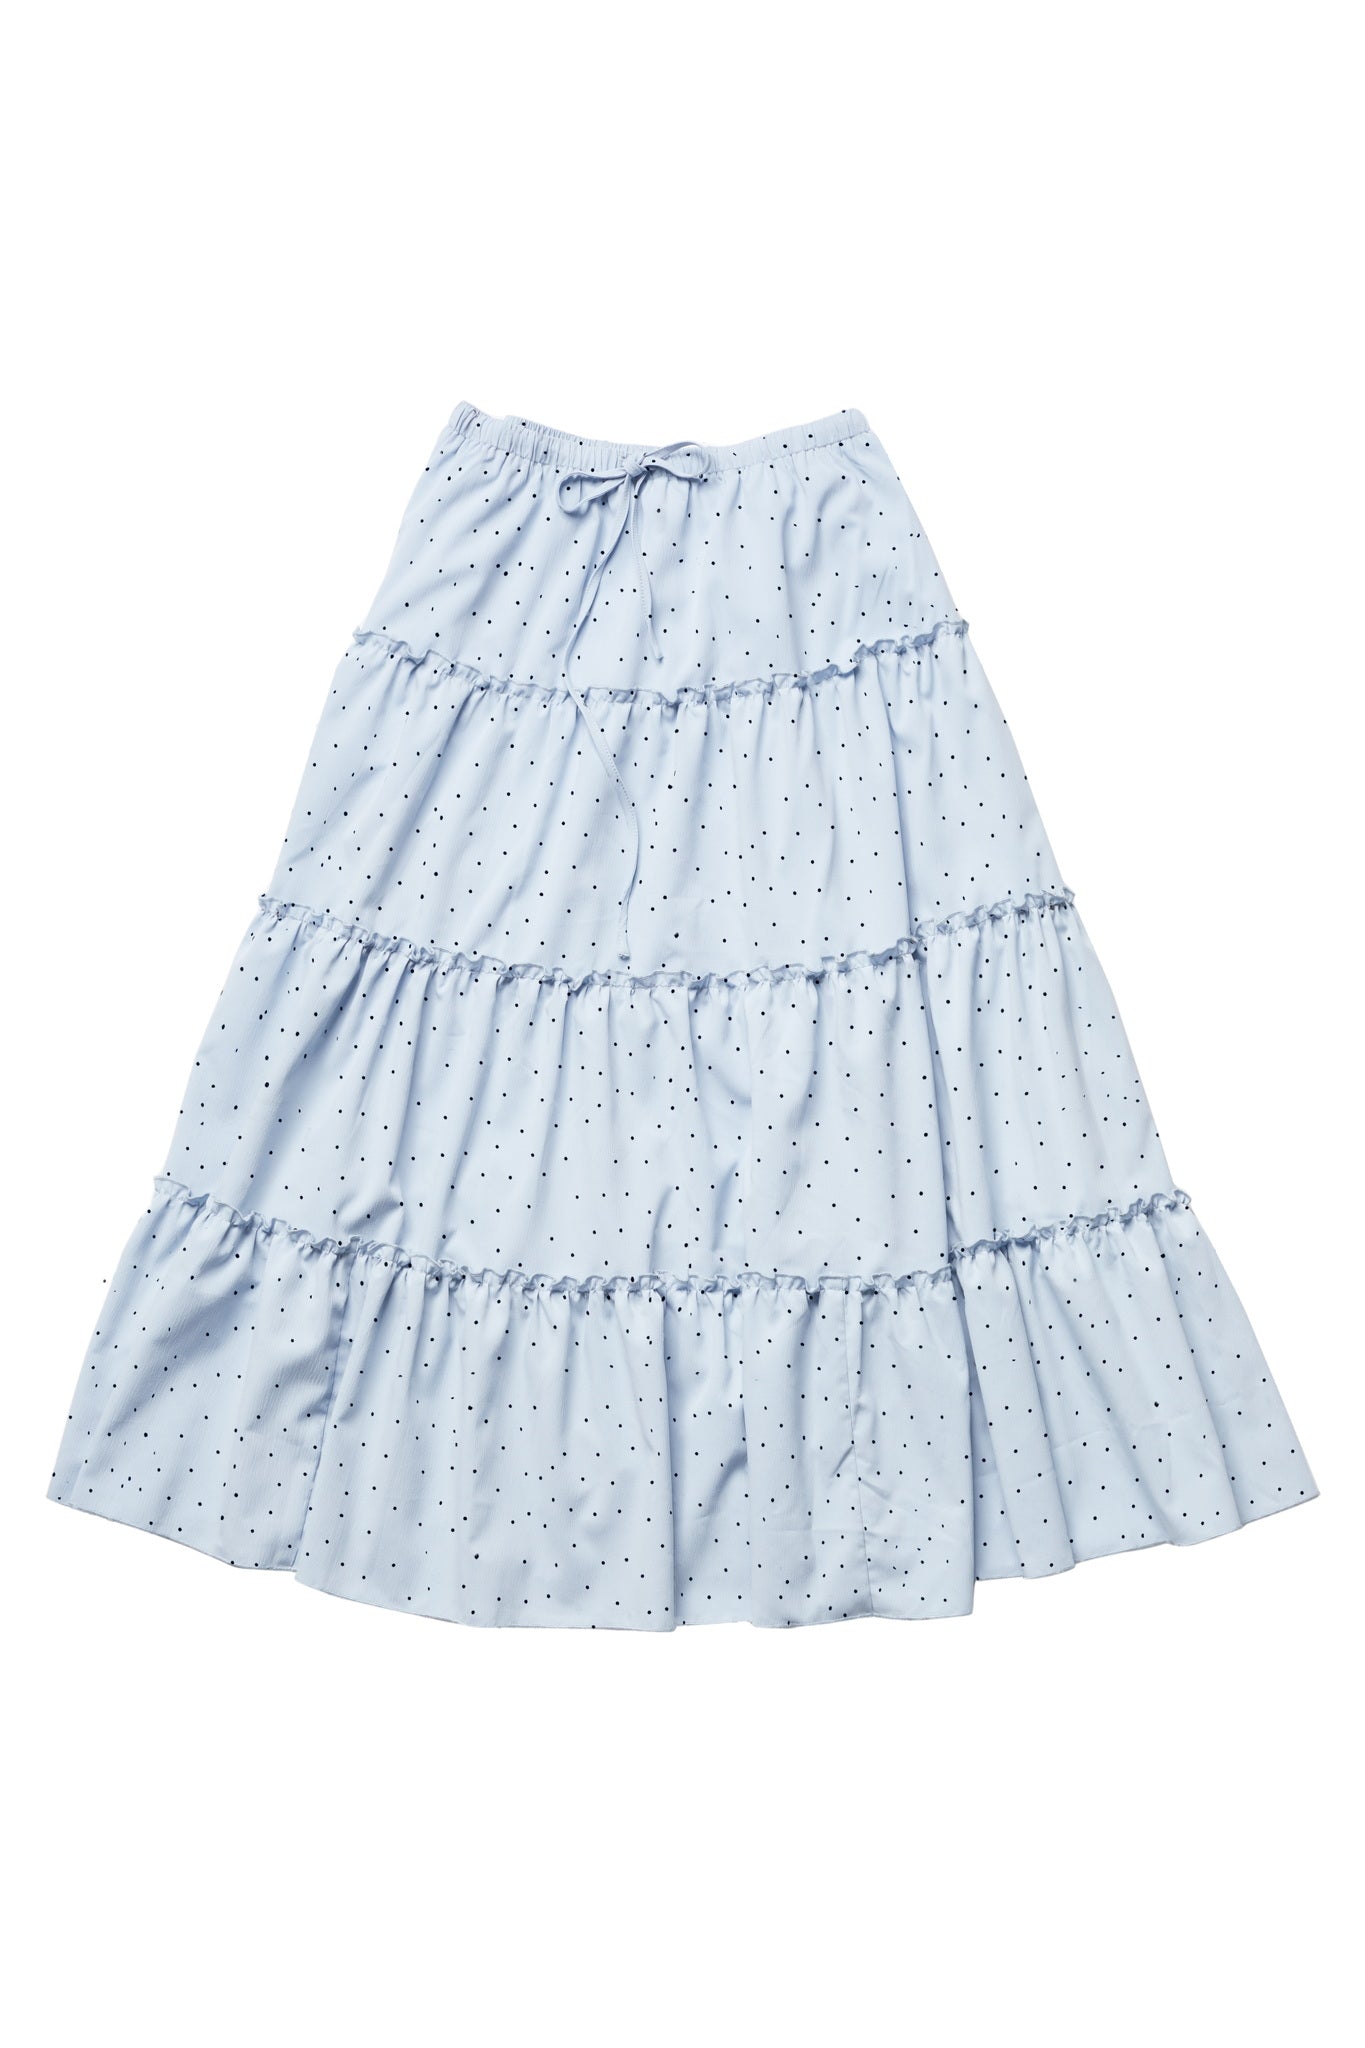 Olivia Skirt in Dotted Blue #7933